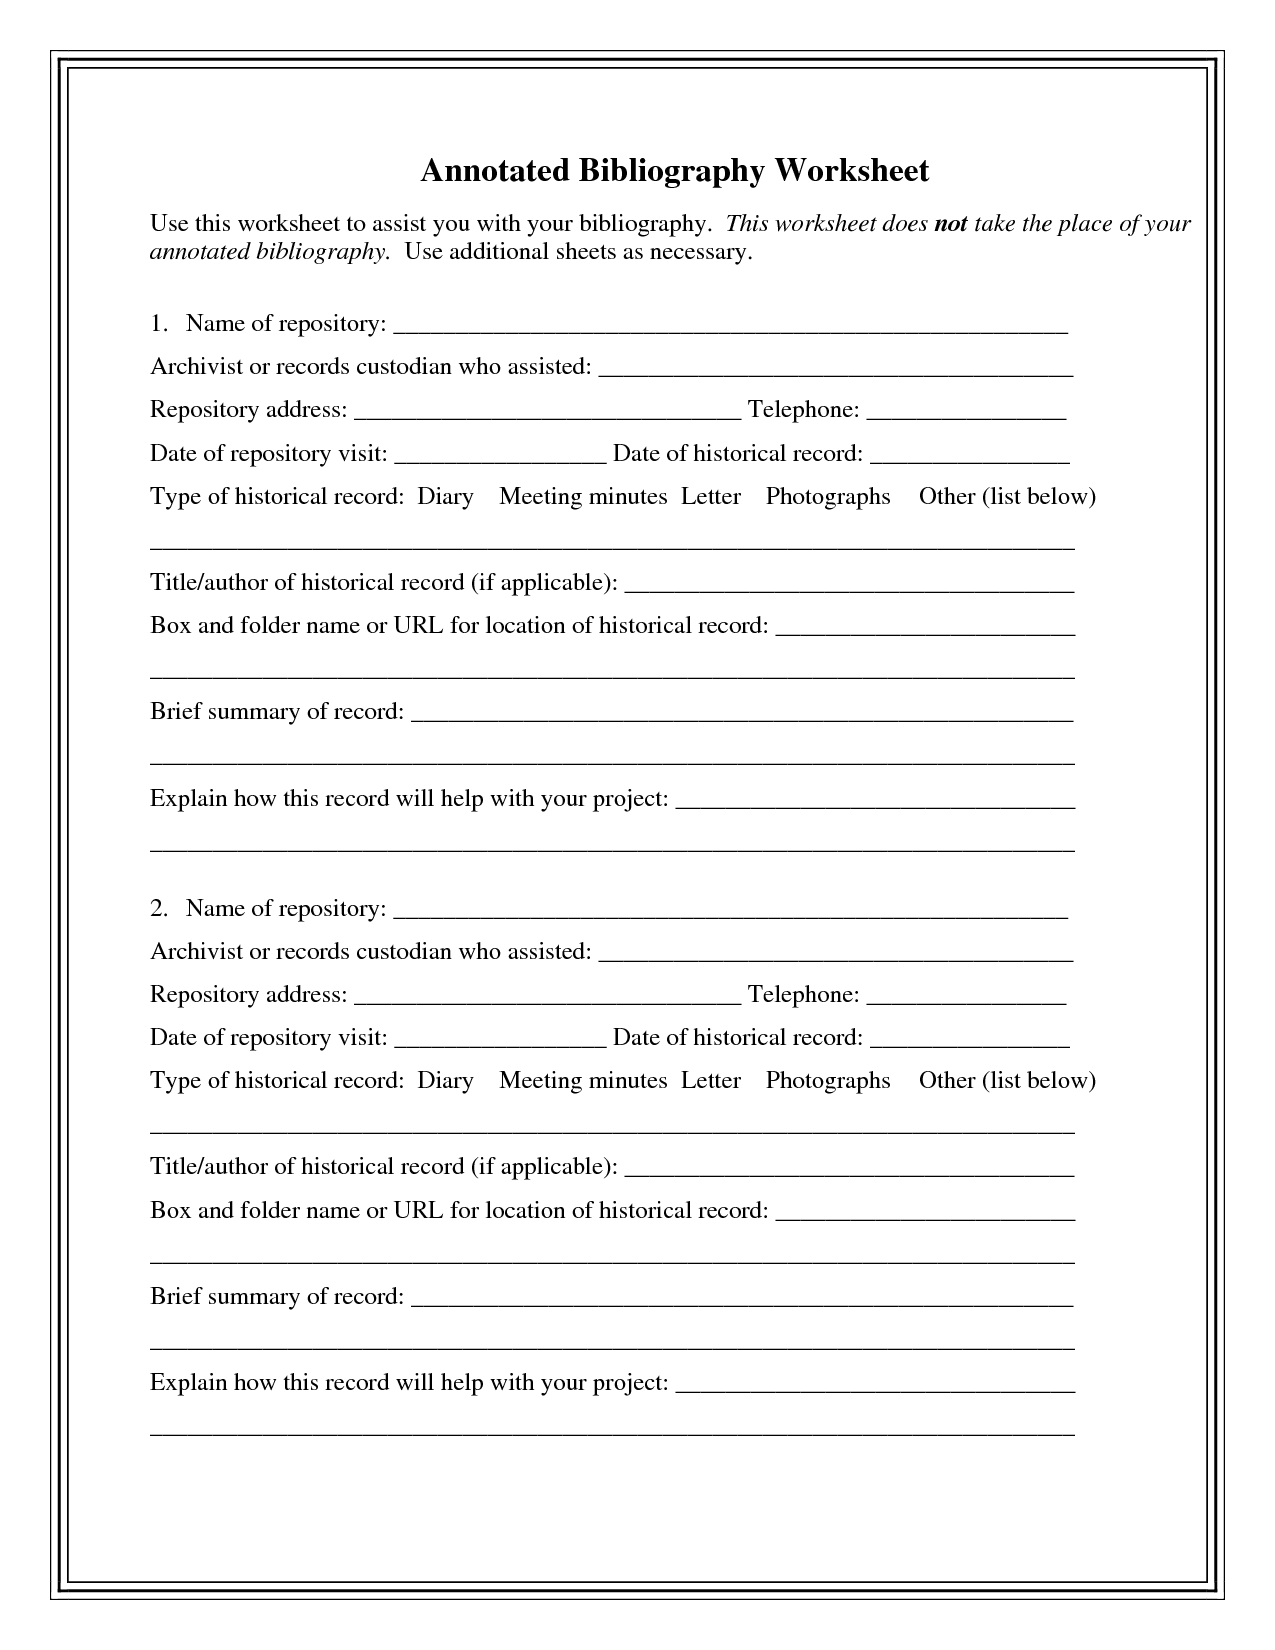 14-best-images-of-bibliography-practice-worksheet-bibliography-format-worksheet-bibliography